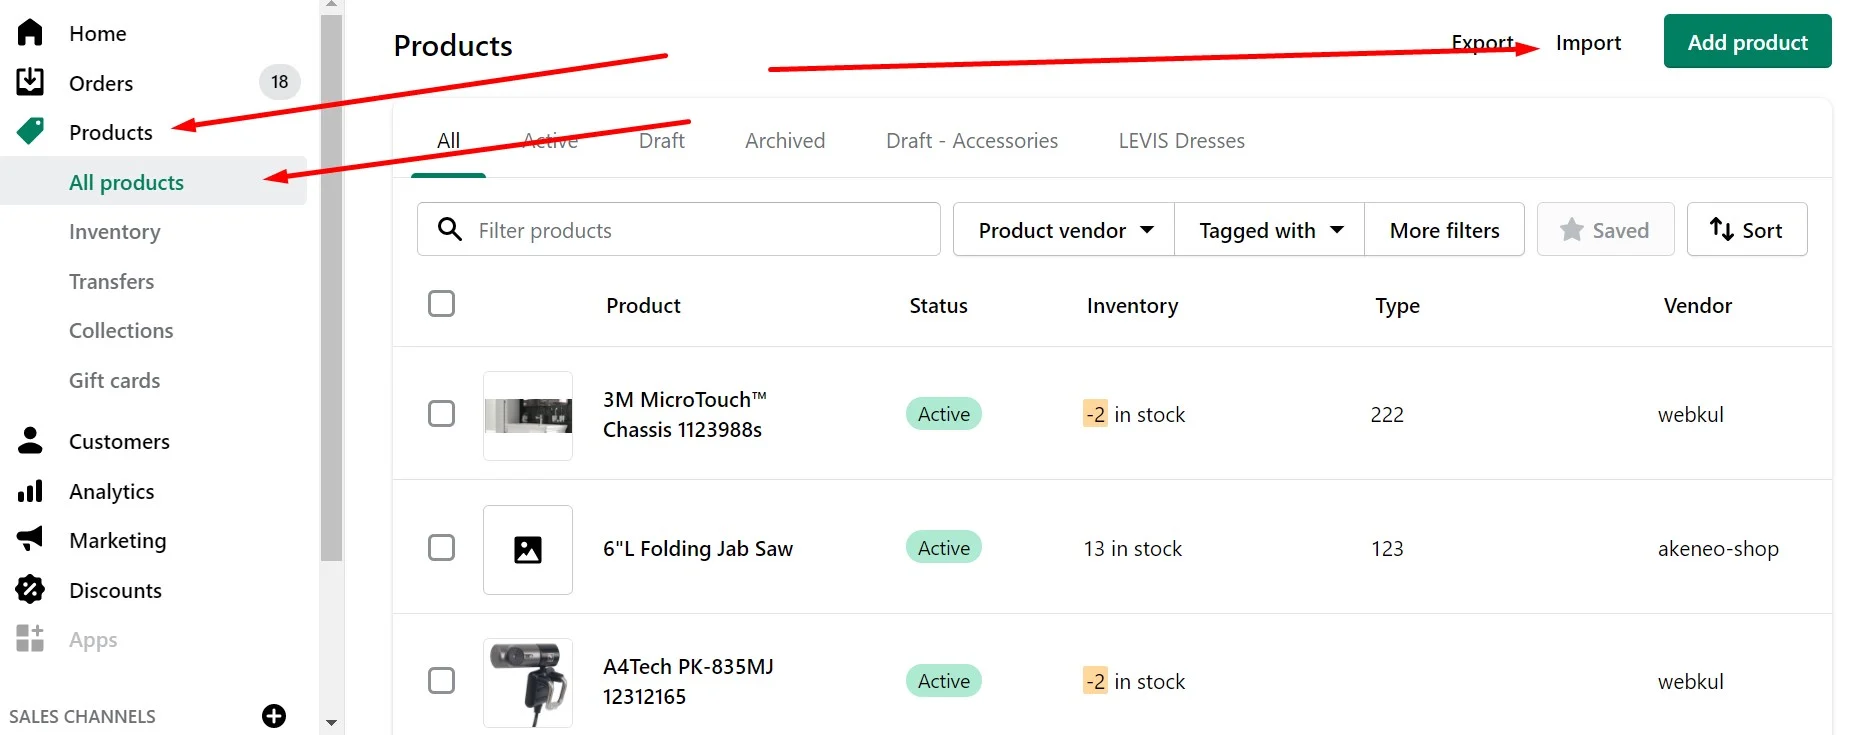 Adding Multiple Products to Your Shopify Store